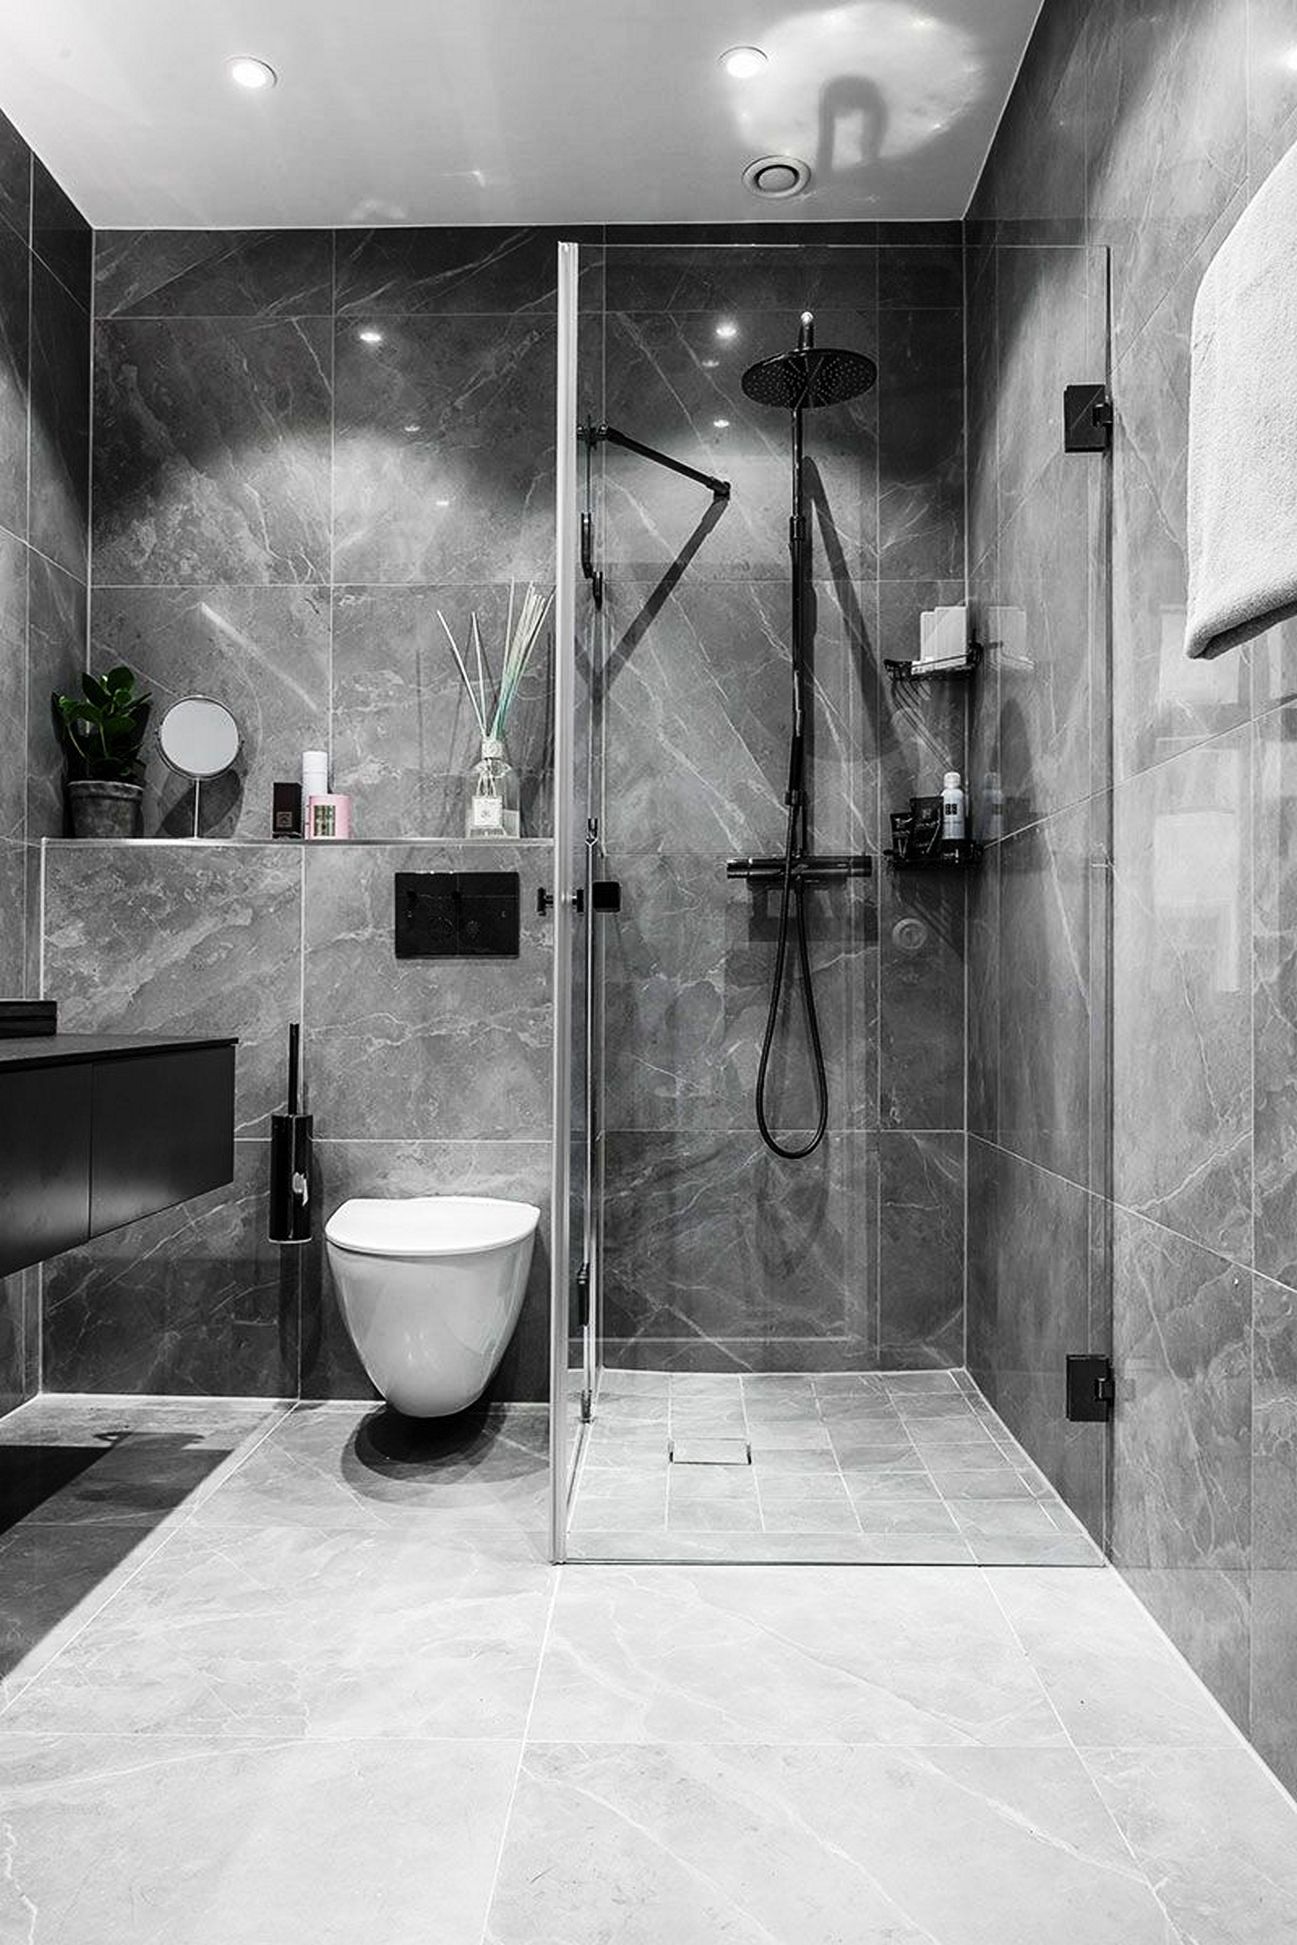 Bathroom trends 2021 the perfect new look for your bathroom renovation 1